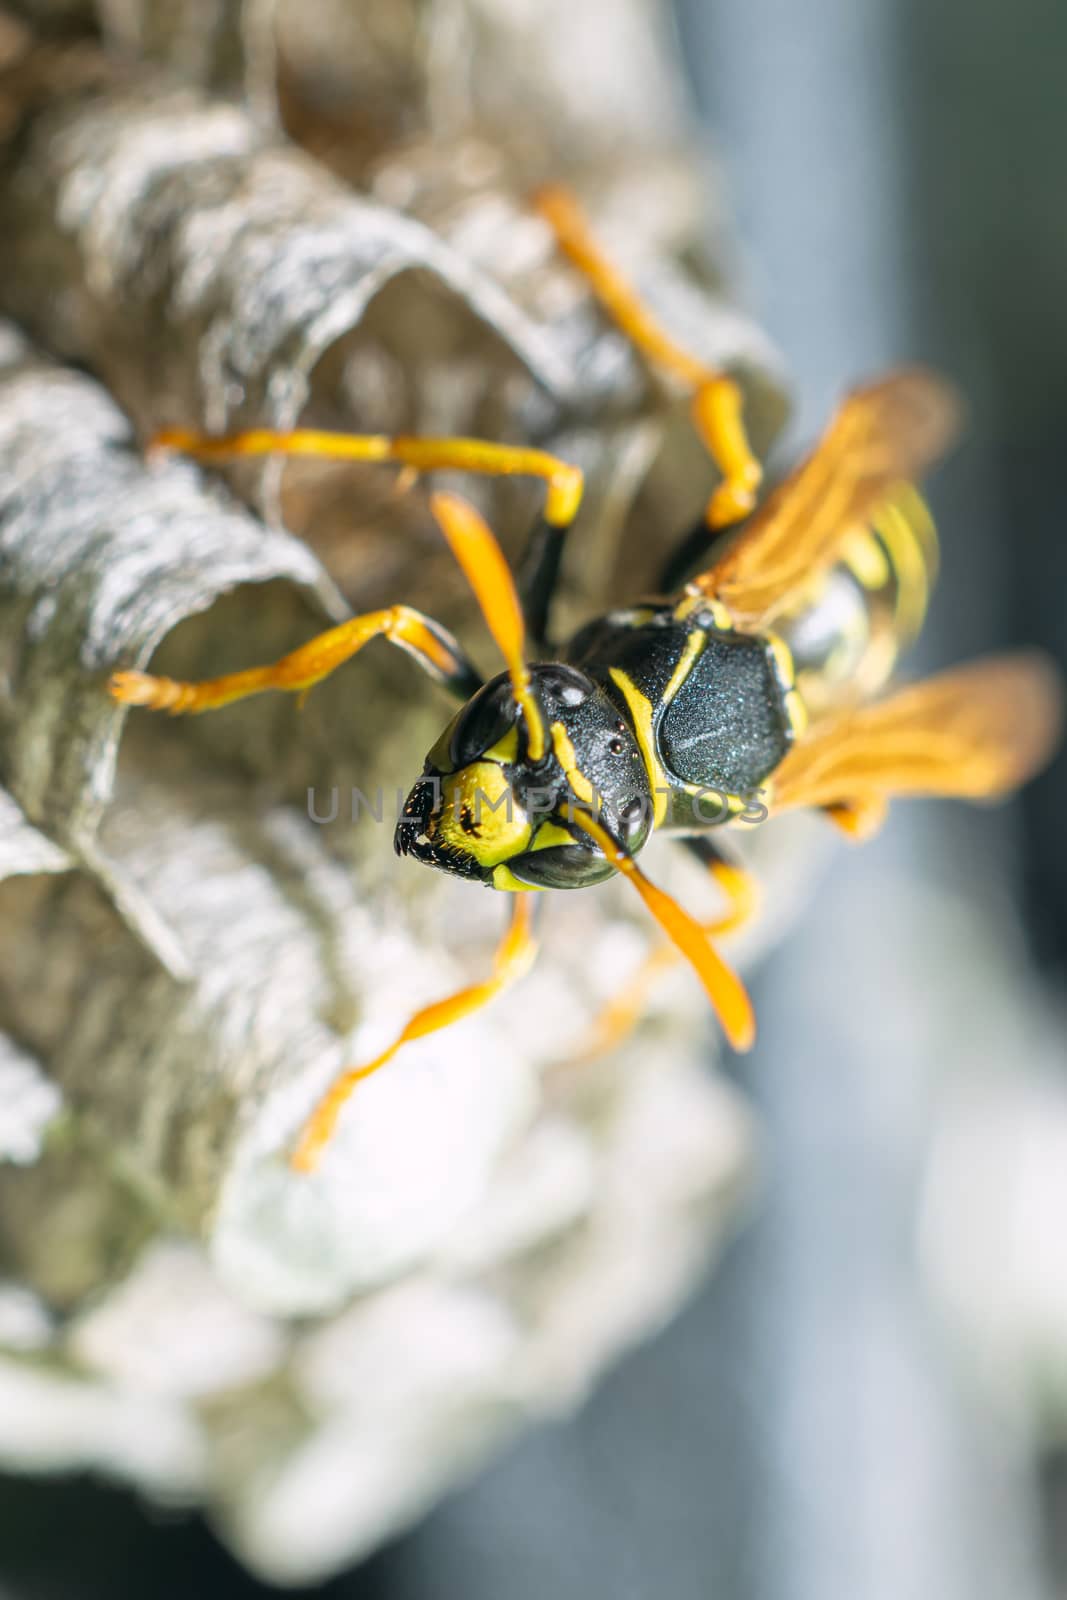 Macro closeup of a wasps' nest with the wasps sitting and protecting the nest by Umtsga